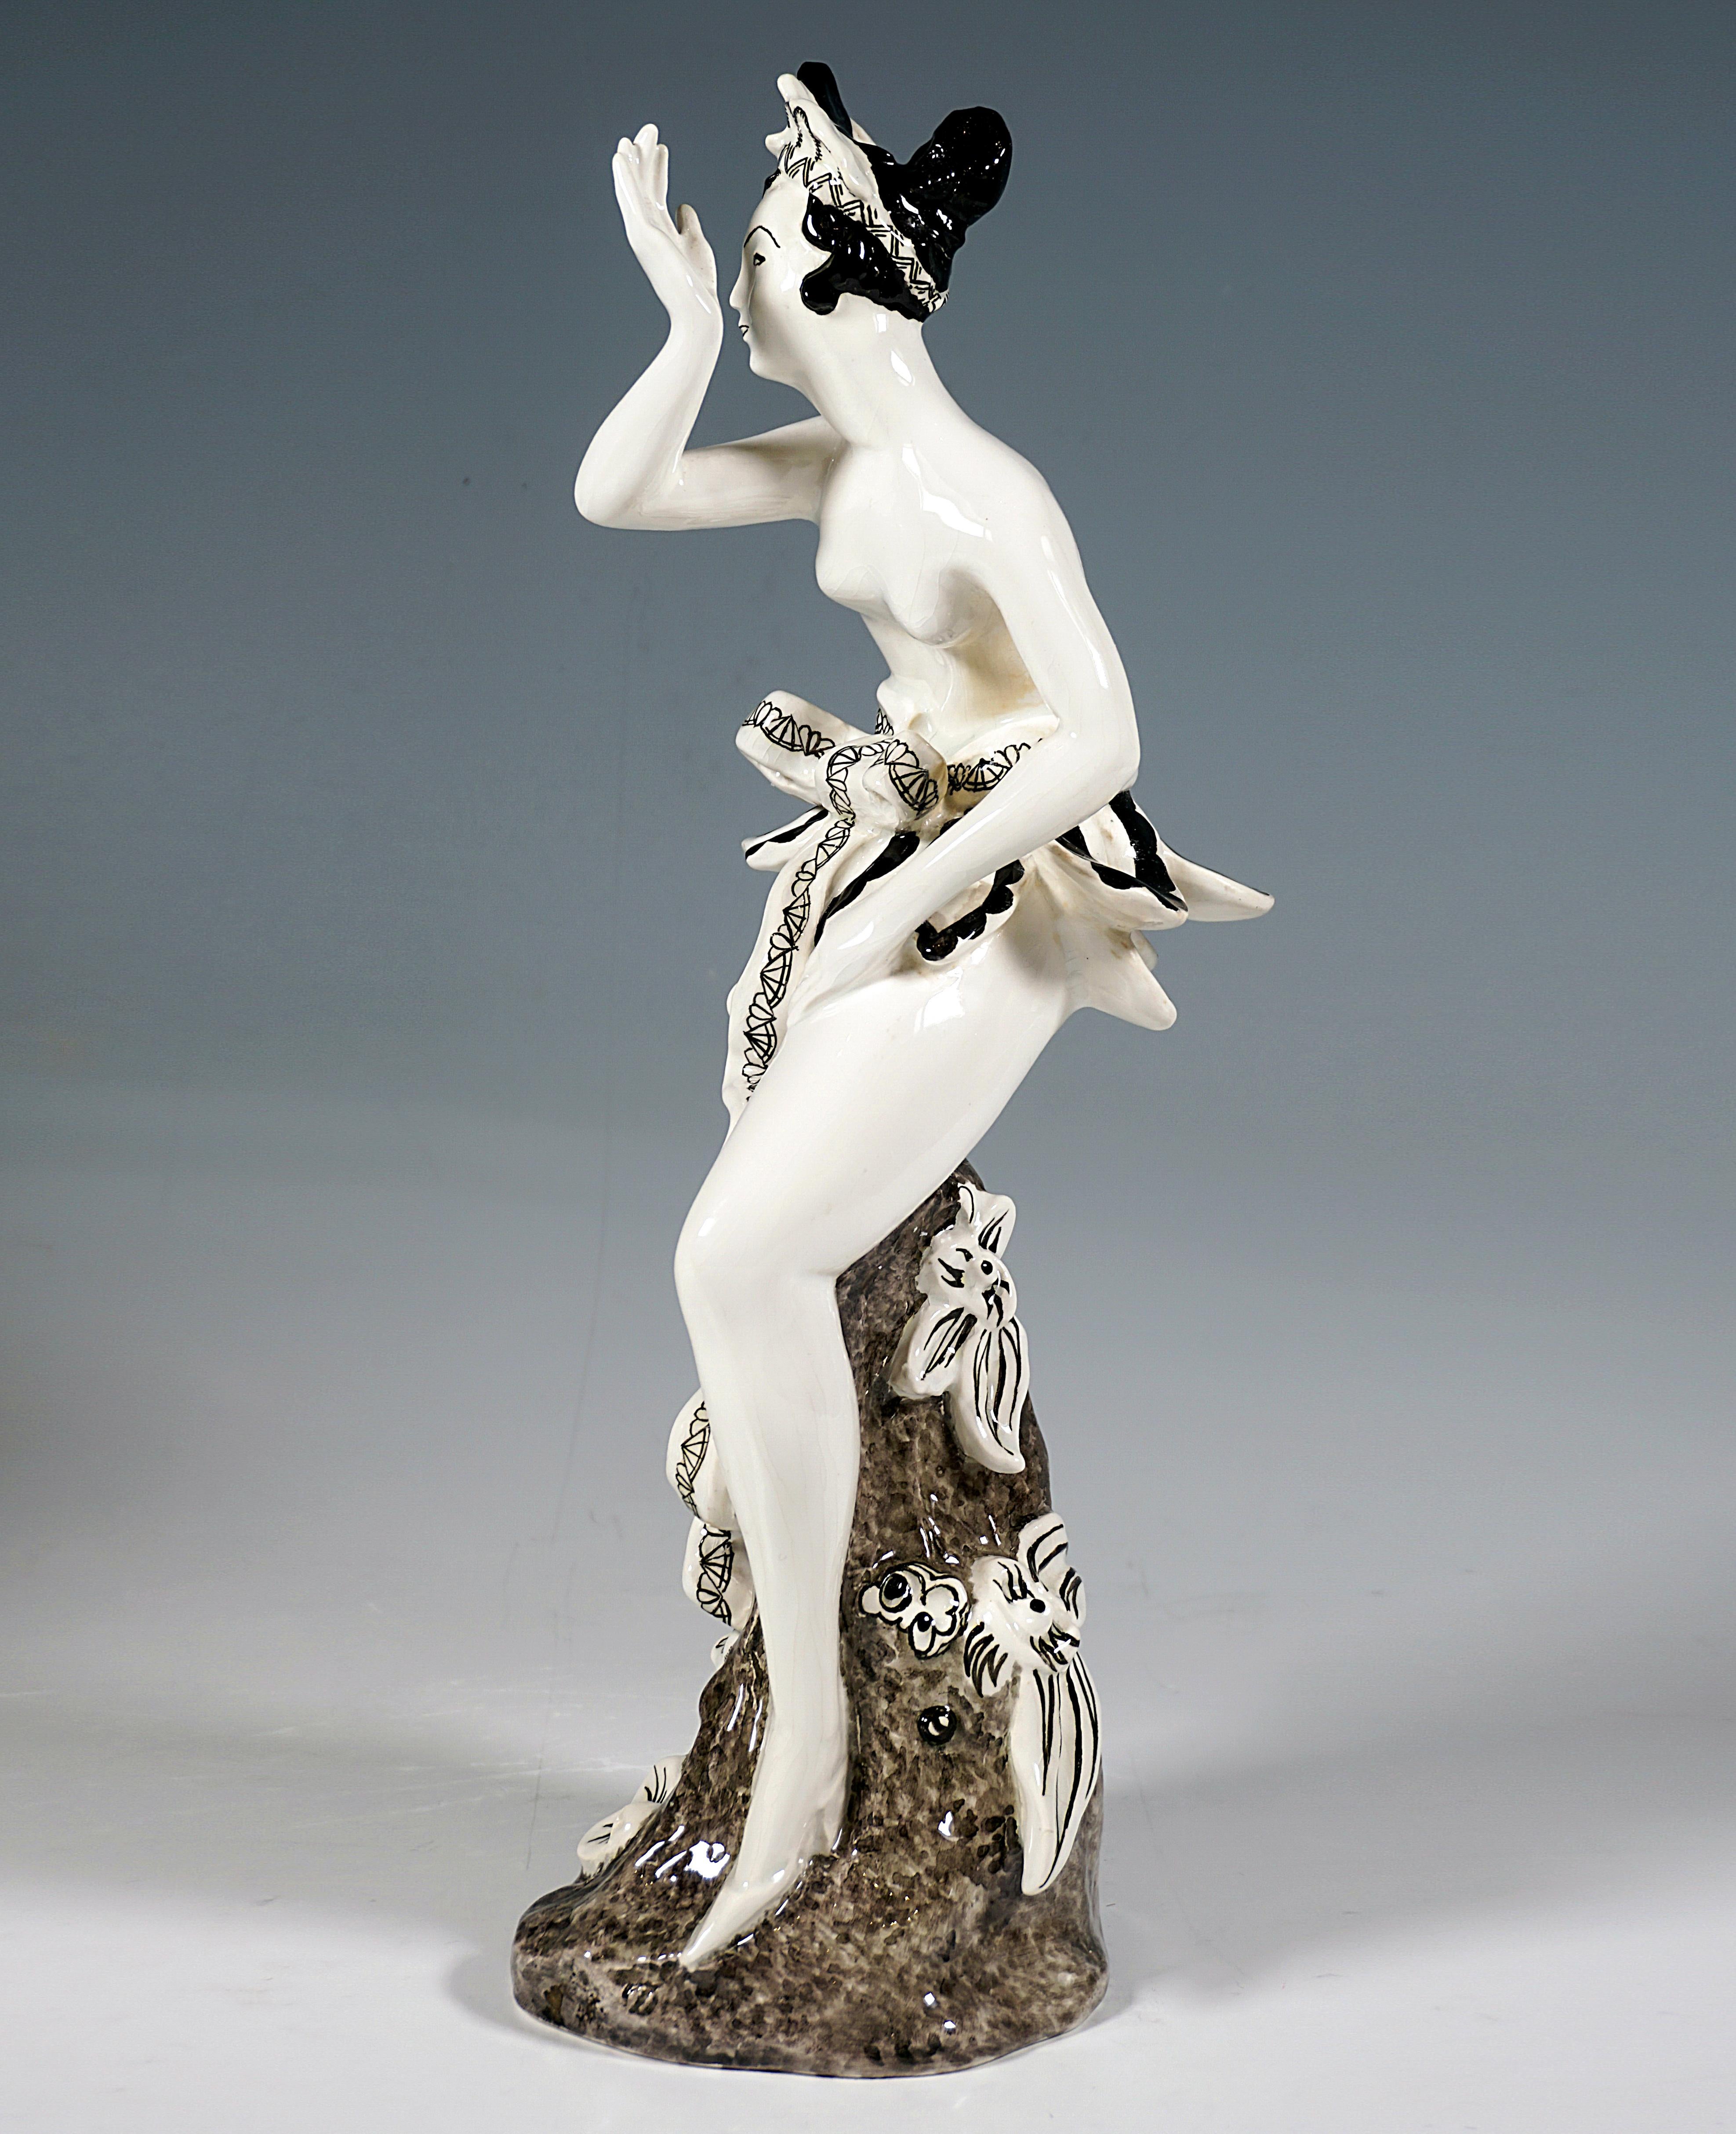 Impressive Goldscheider Vienna Ceramic Figurine of the 1920s:
The young lady with artfully pinned up hair and headdress wears only an exotic-looking short skirt in the manner of a row of protruding flower petals, which are tied around the hips with